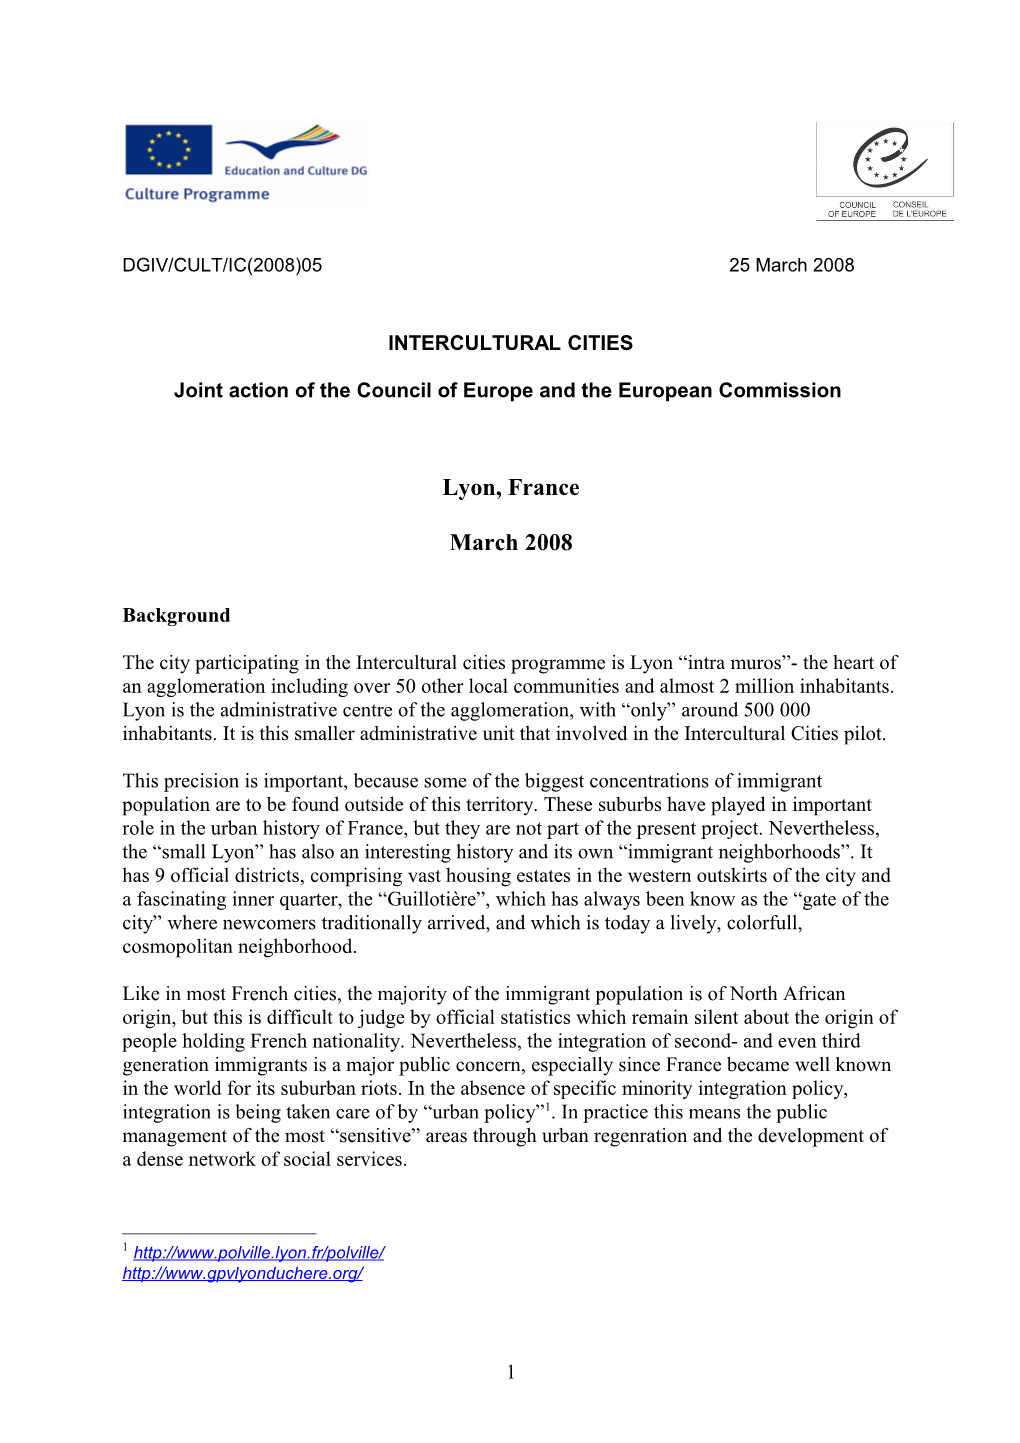 Joint Action of the Council of Europe and the European Commission